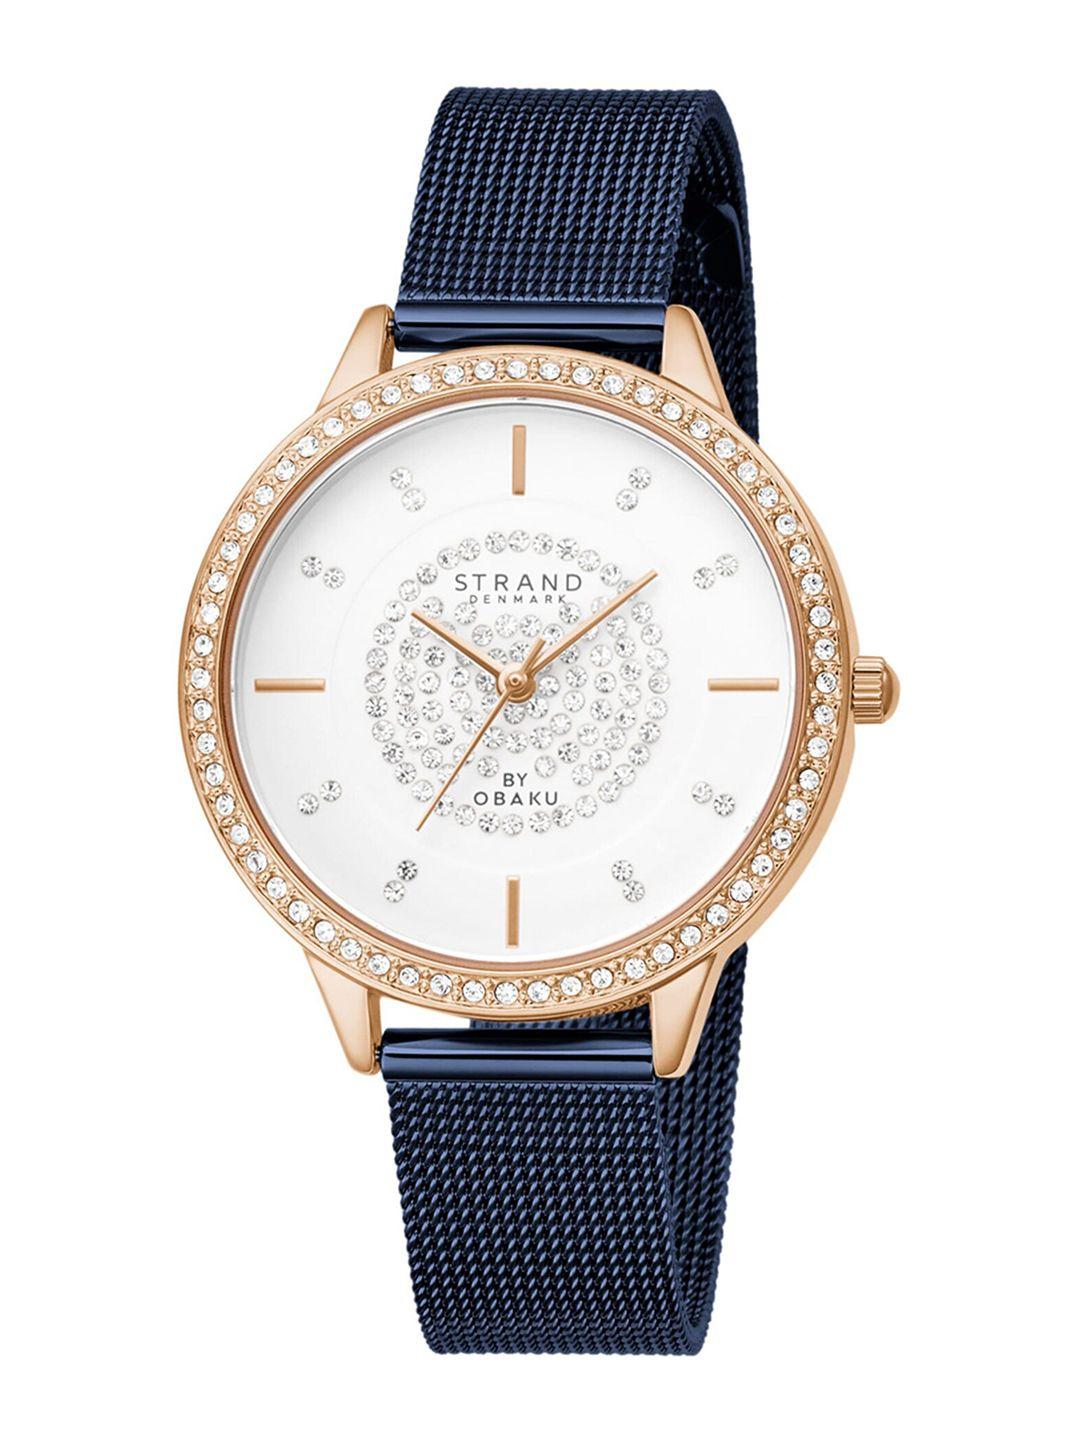 strand-by-obaku-women-brass-embellished-dial-with-stainless-steel-strap-analogue-watch